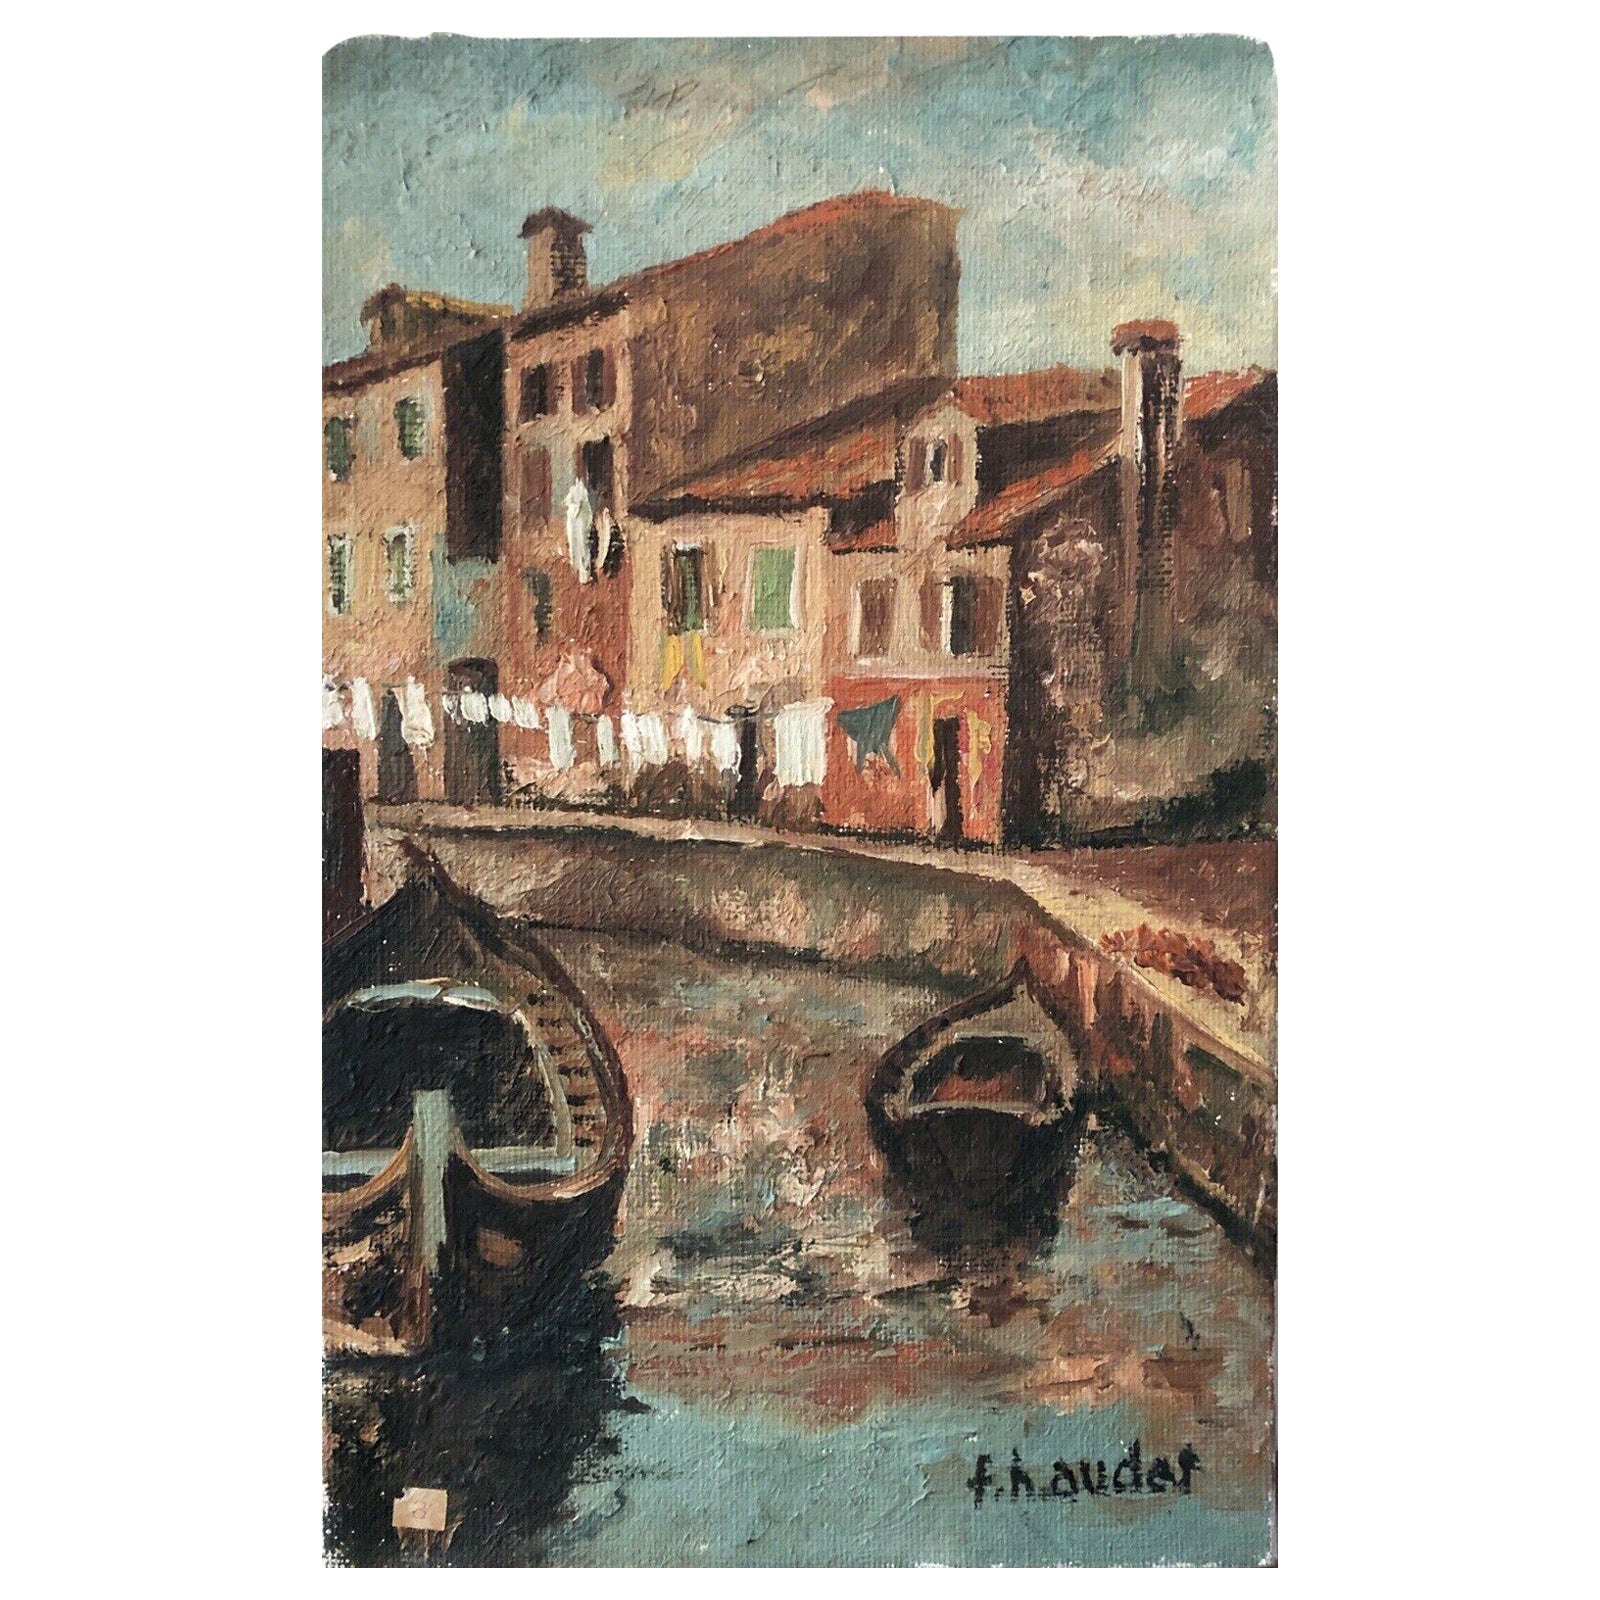 Fernand Audet Signed French Post-Impressionist Oil, Old French Town For Sale